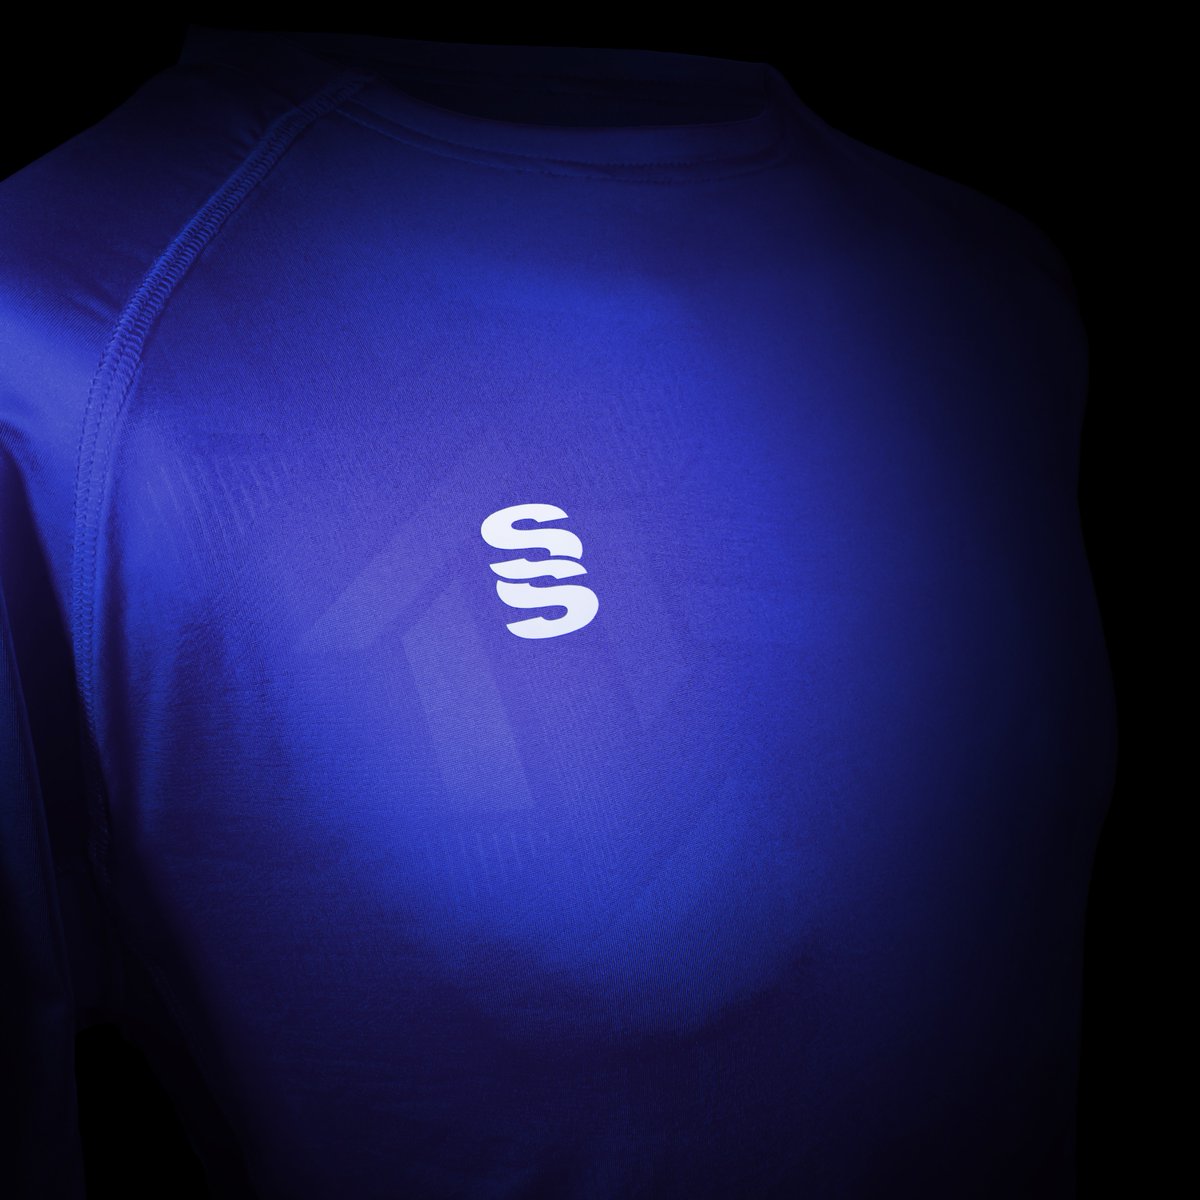 Introducing our latest innovation tailored just for you - experience unparalleled comfort, durability, and agility. 🌟 Stay tuned for the launch of our NEW Impact Range! 🚀 Contact us for further information. 📧 sales@sdlgroupltd.com #surridgeissport #sport #impactrange